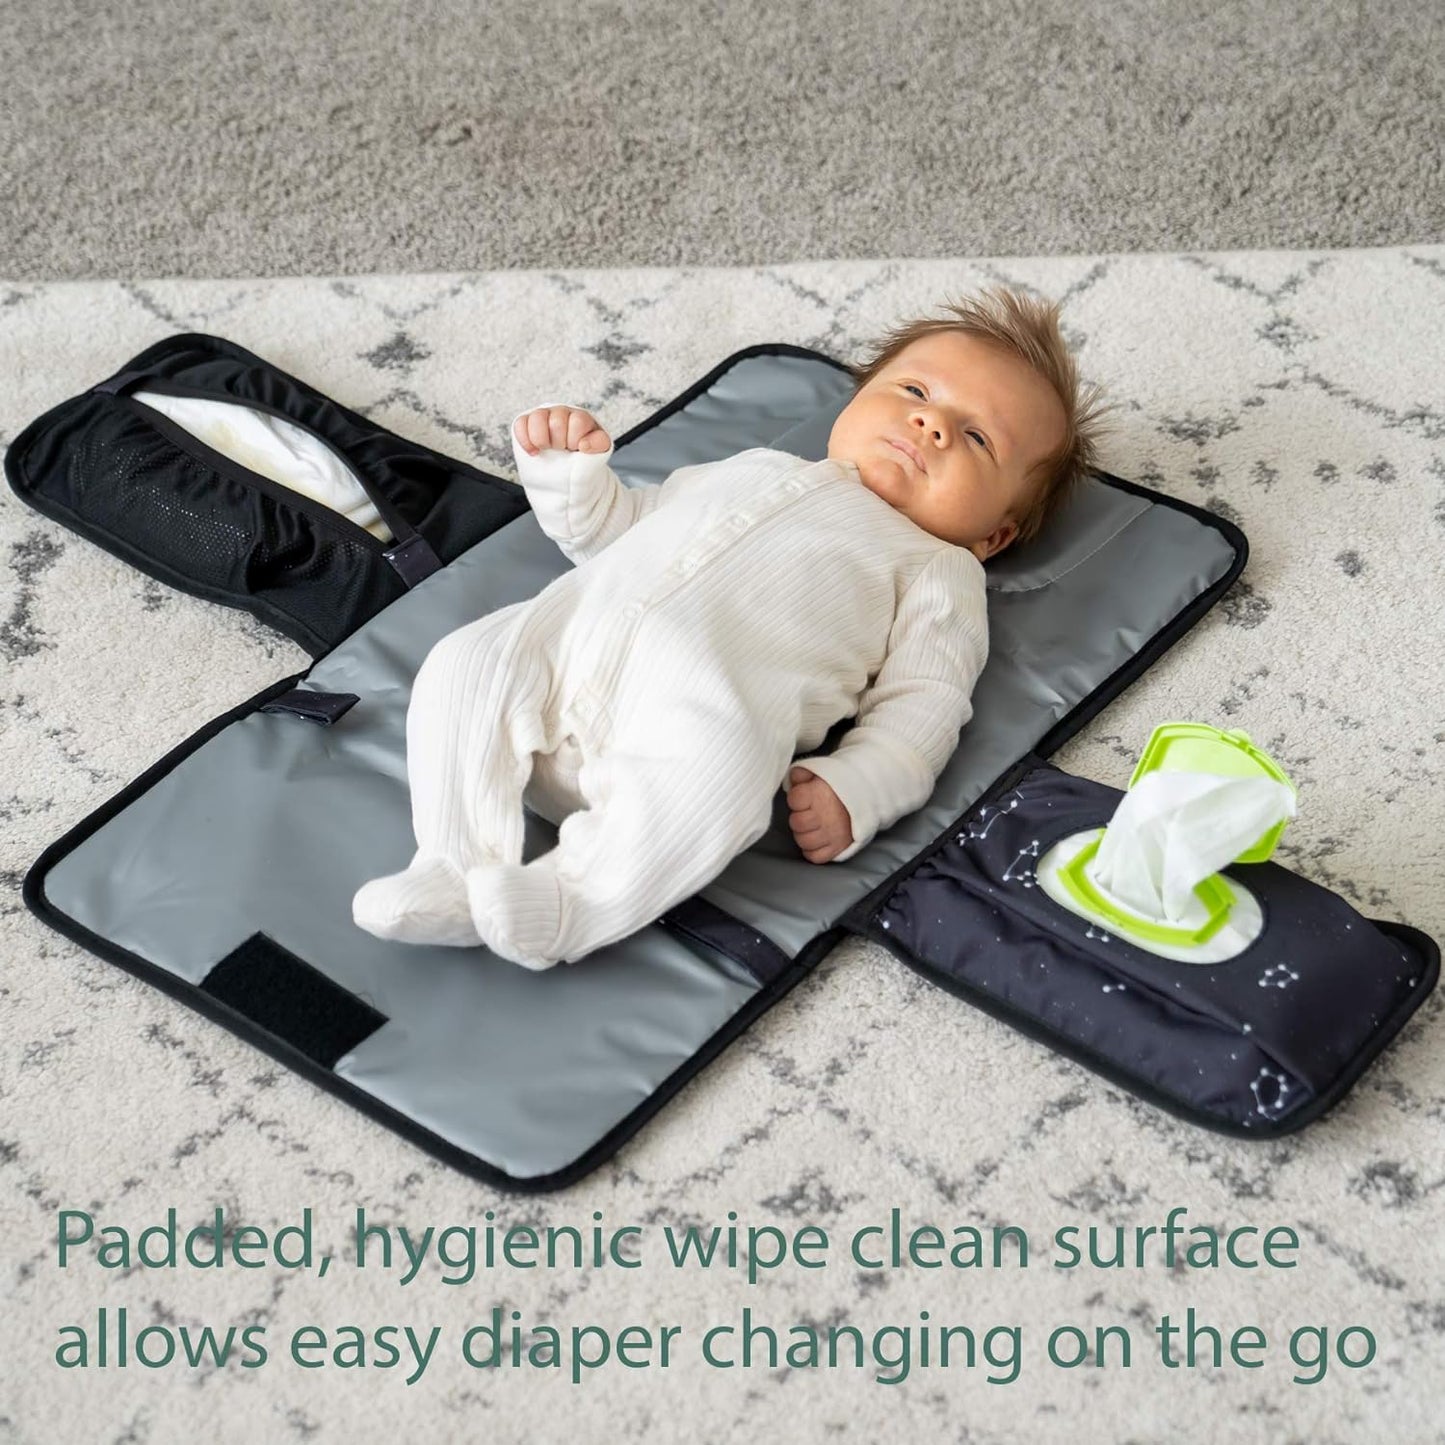 Baby Changing Pad by Lil Fox. Portable Changing Pad for Baby Diaper Bag or Changing Table Pad. One-Hand Diaper Change Pad. Baby Shower Gifts, Newborn Baby Essentials, Unisex Baby Stuff